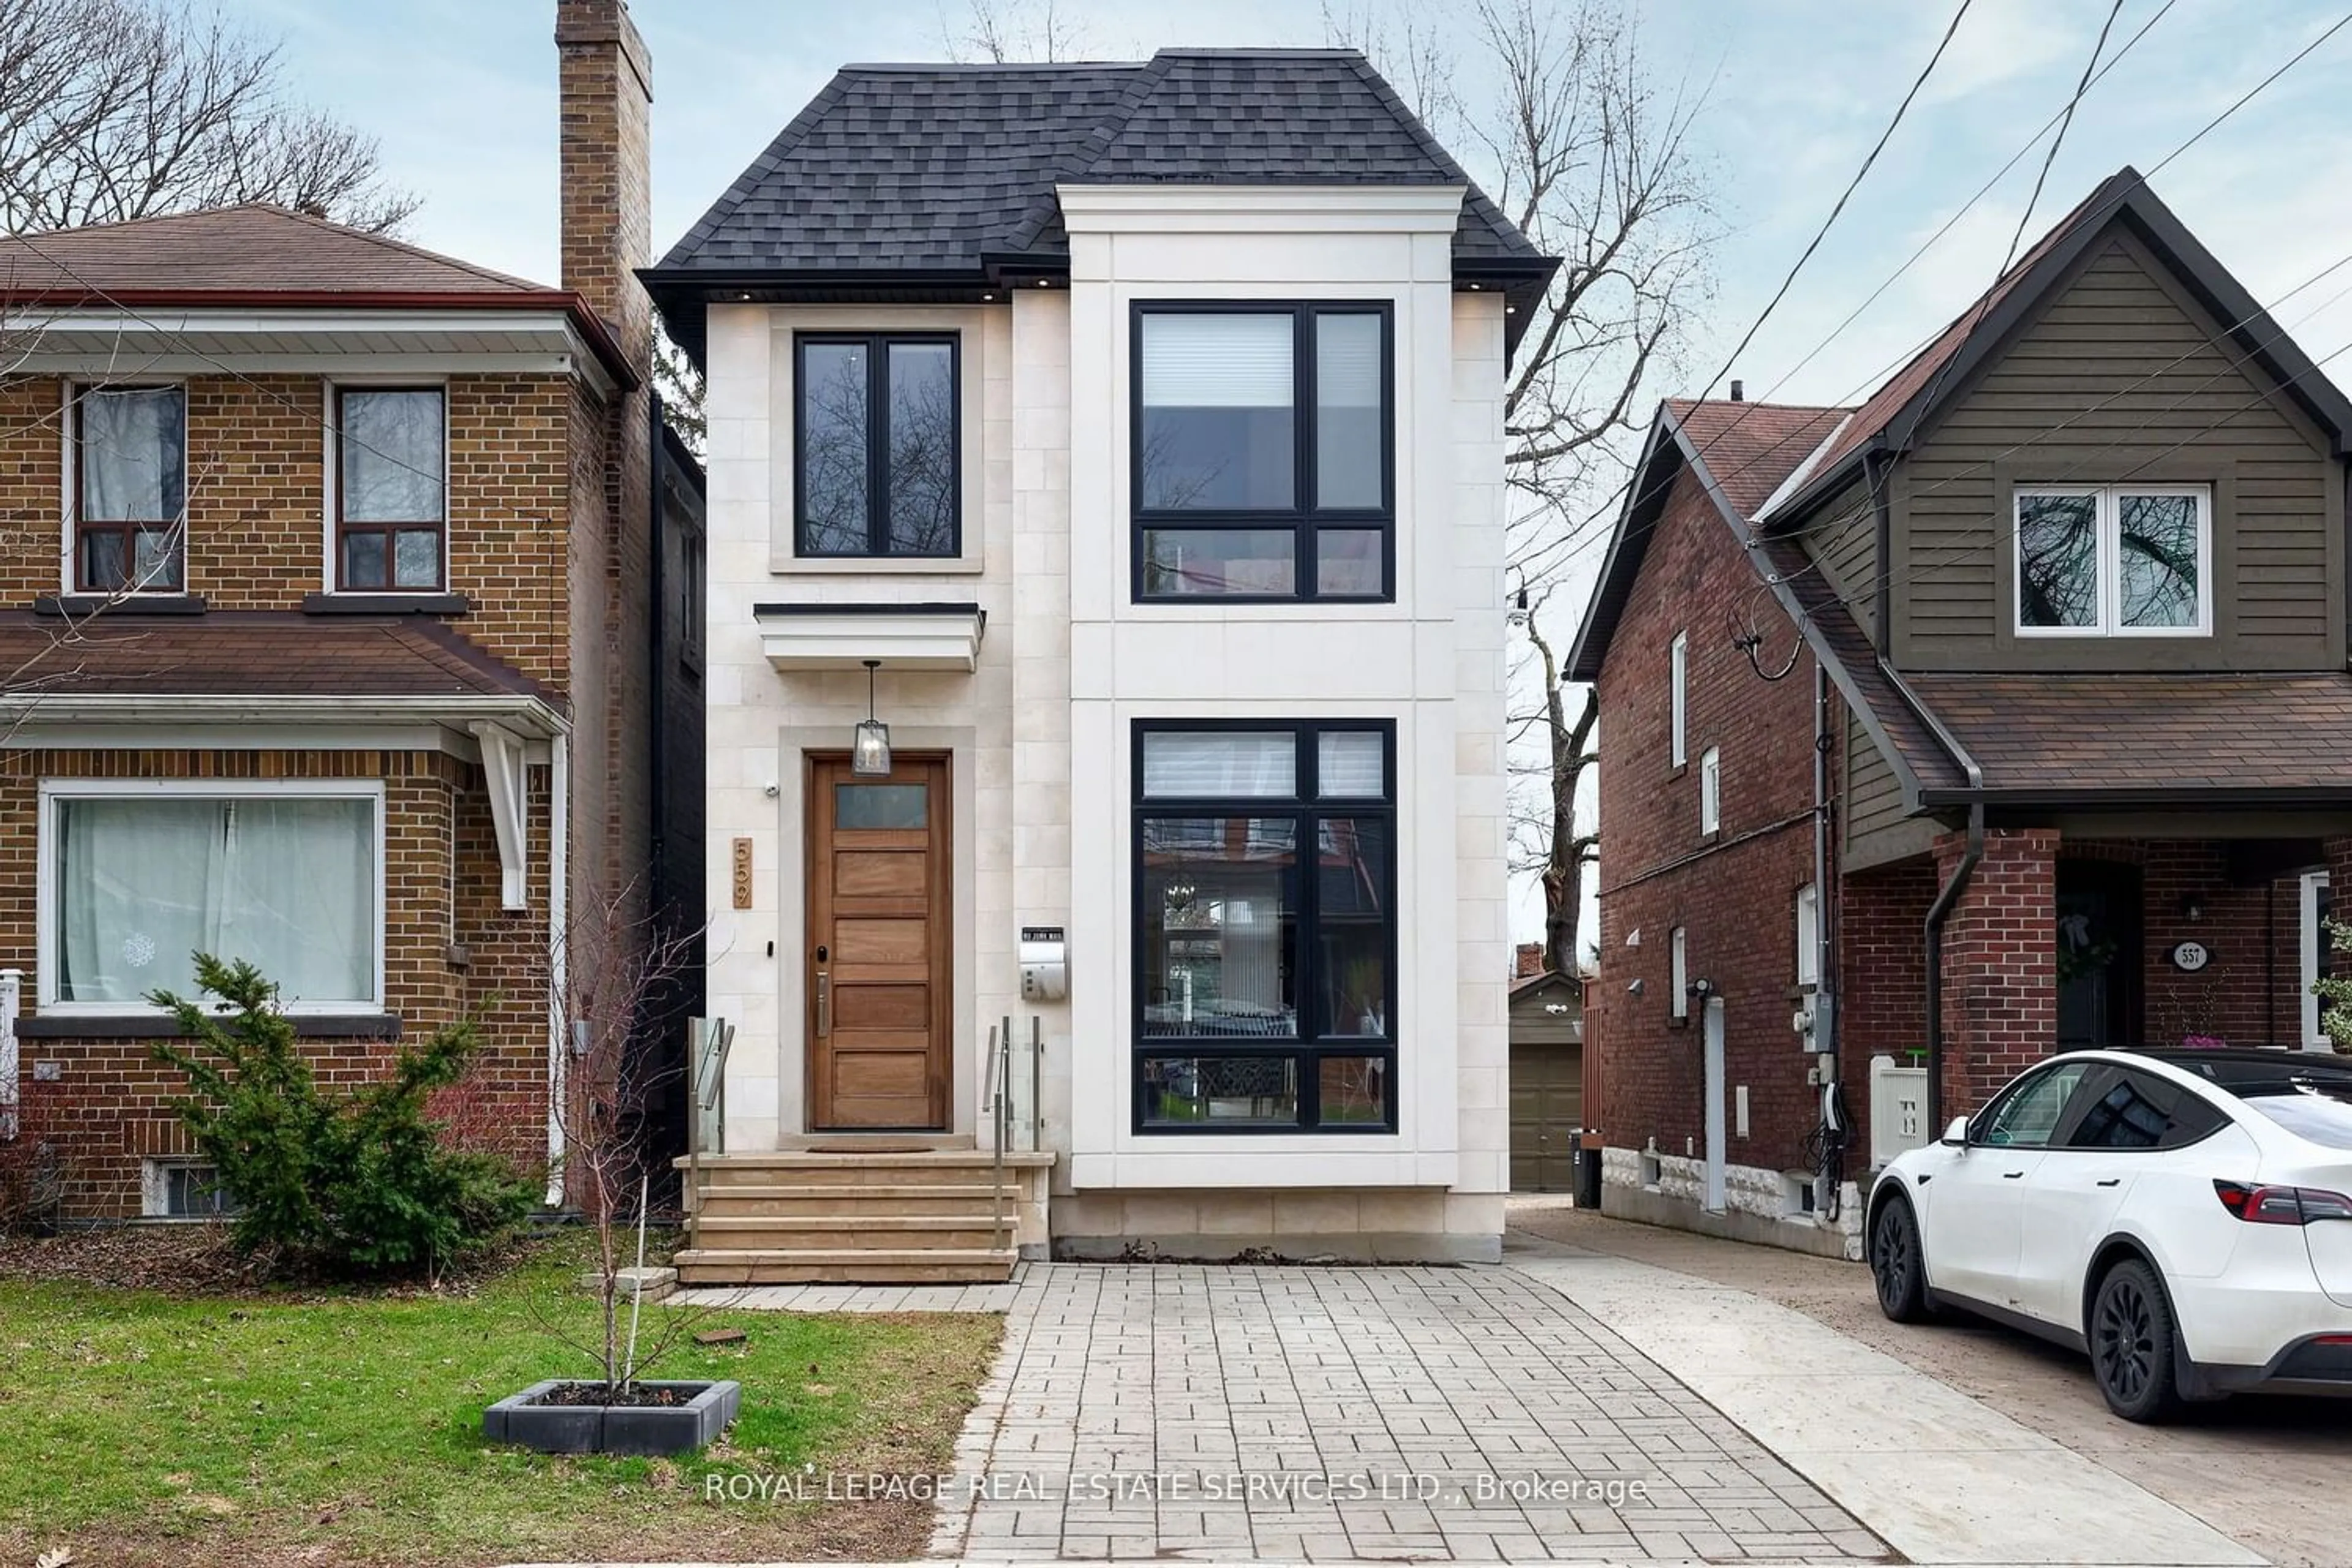 Home with brick exterior material for 559 Millwood Rd, Toronto Ontario M4S 1K7